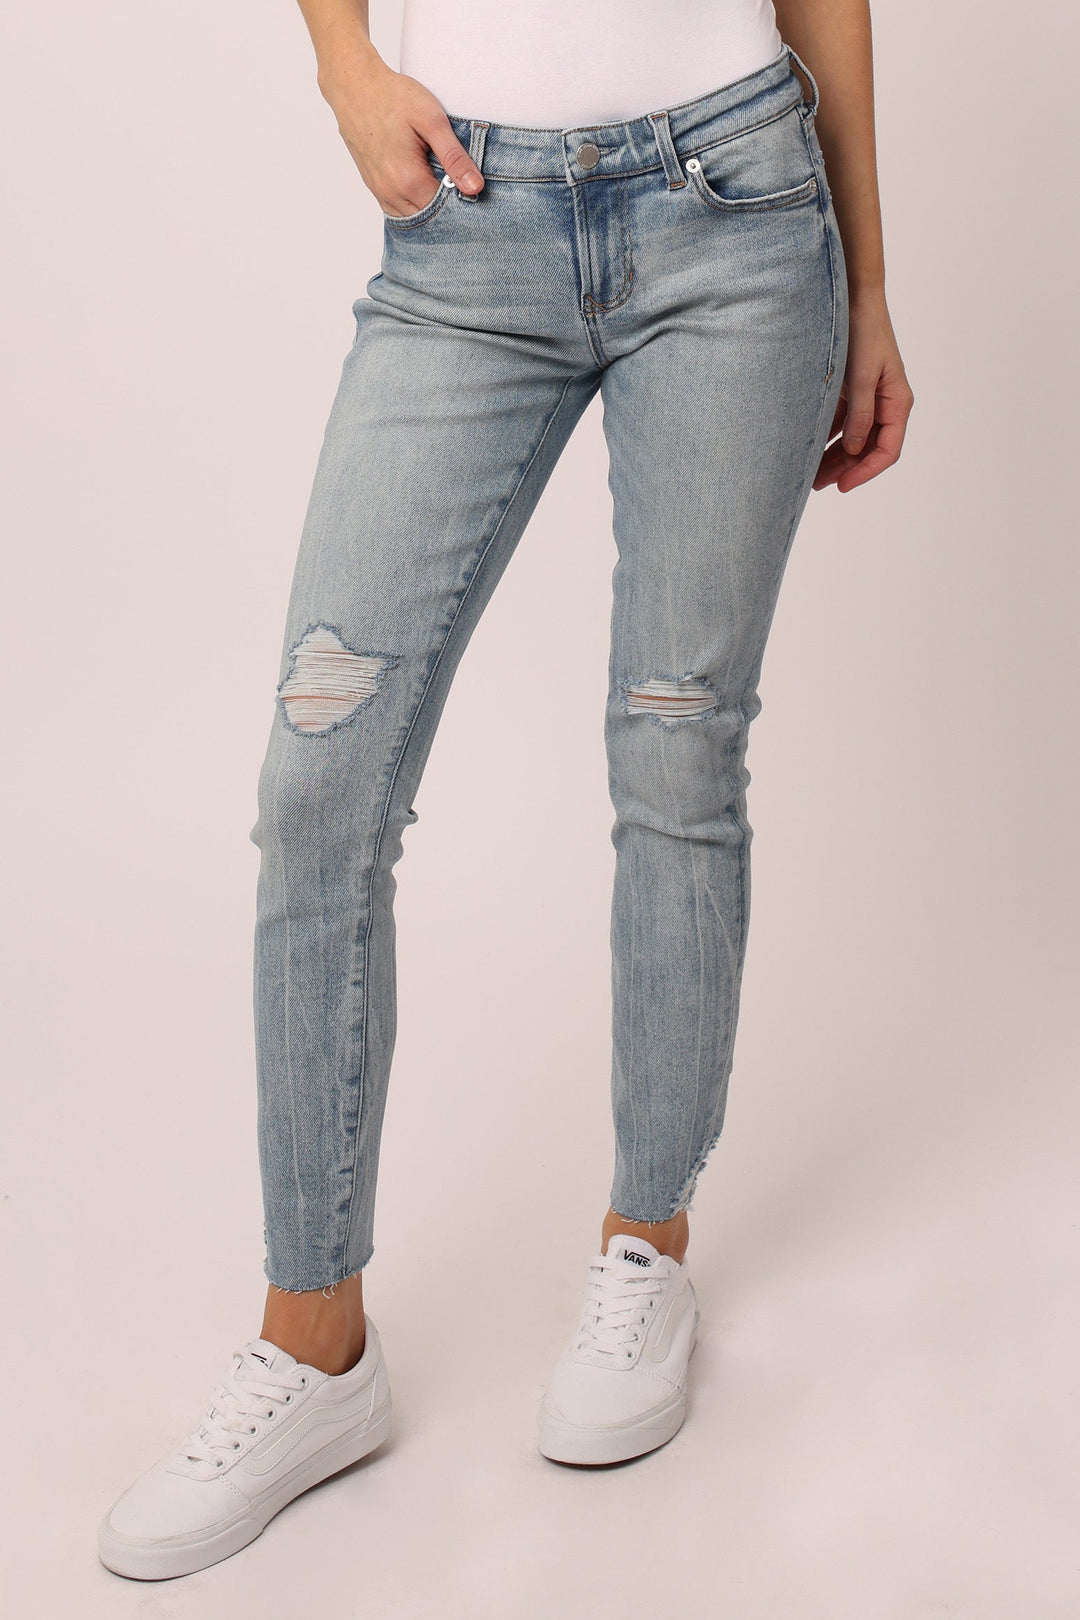 image of a female model wearing a JOYRICH MID RISE SKINNY JEANS ALAMOSA JEANS